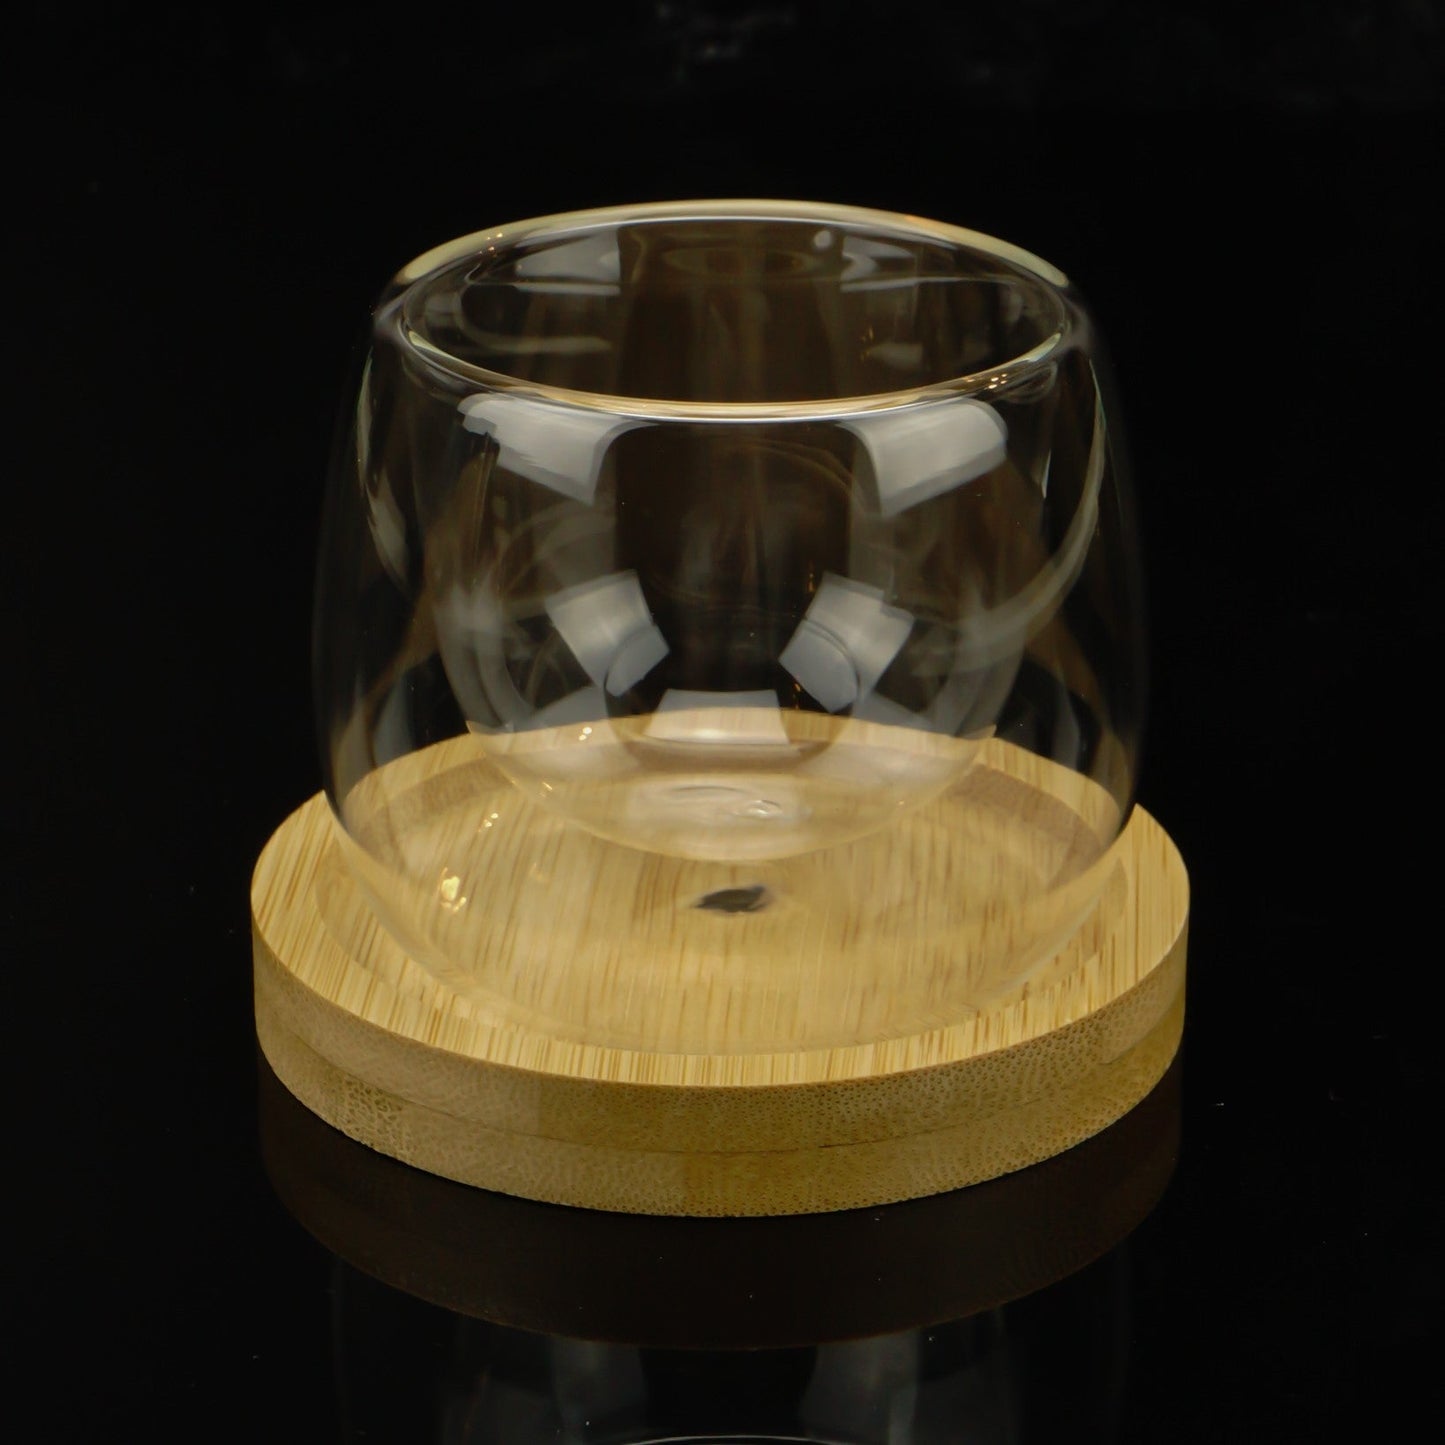 Double-walled glass espresso cup